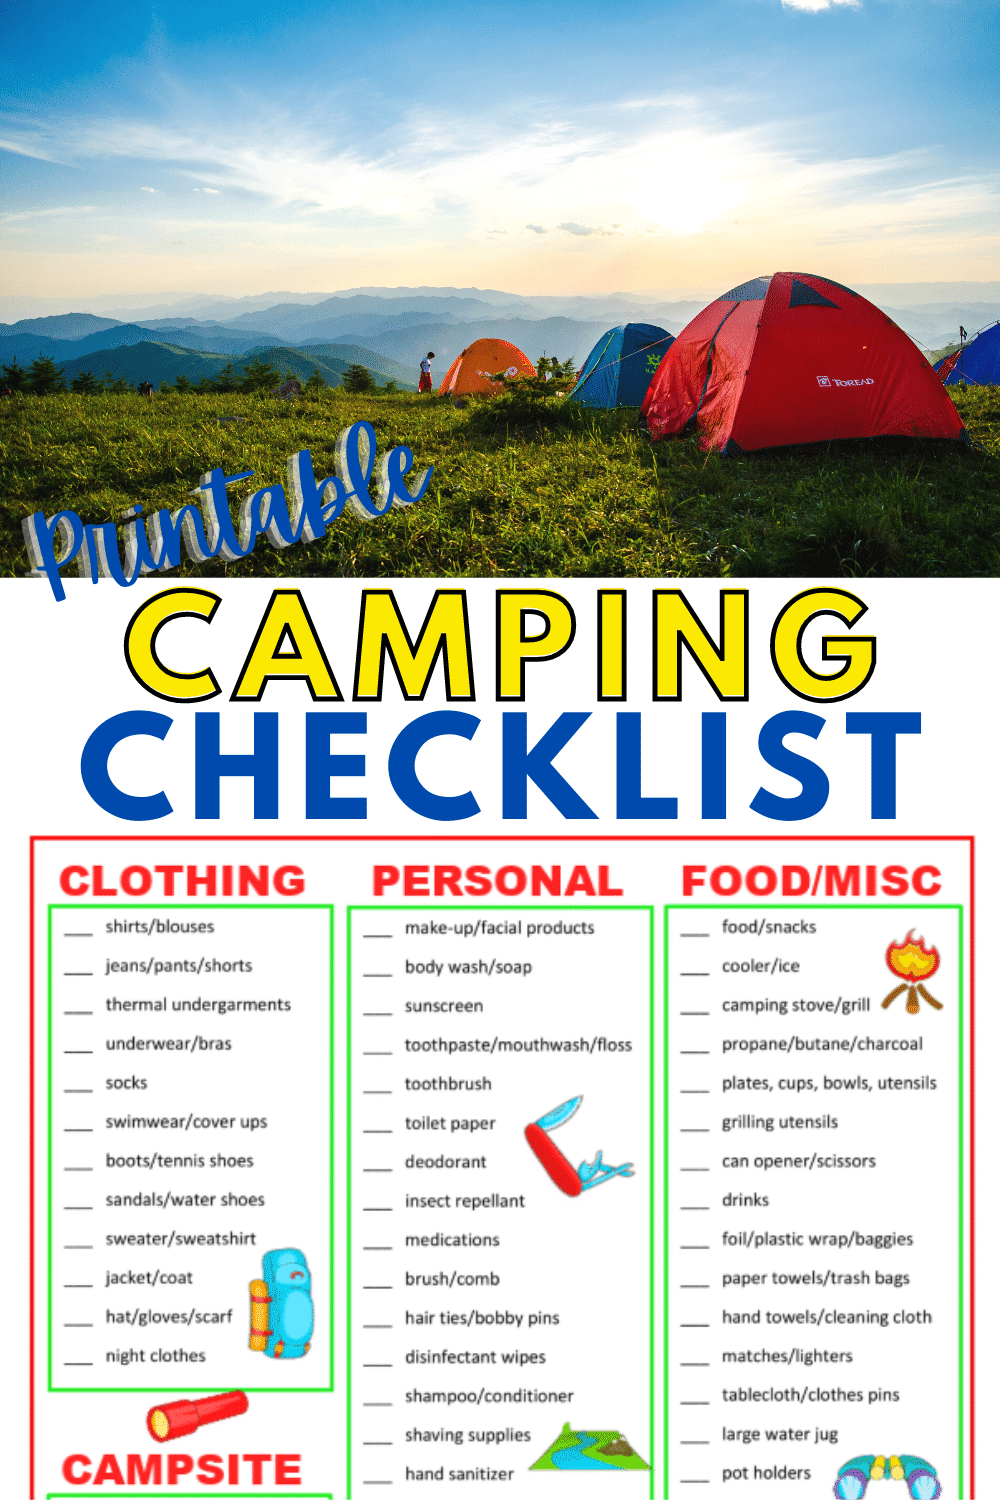 top image is tents on a campground, bottom image and text is a printable camping checklist